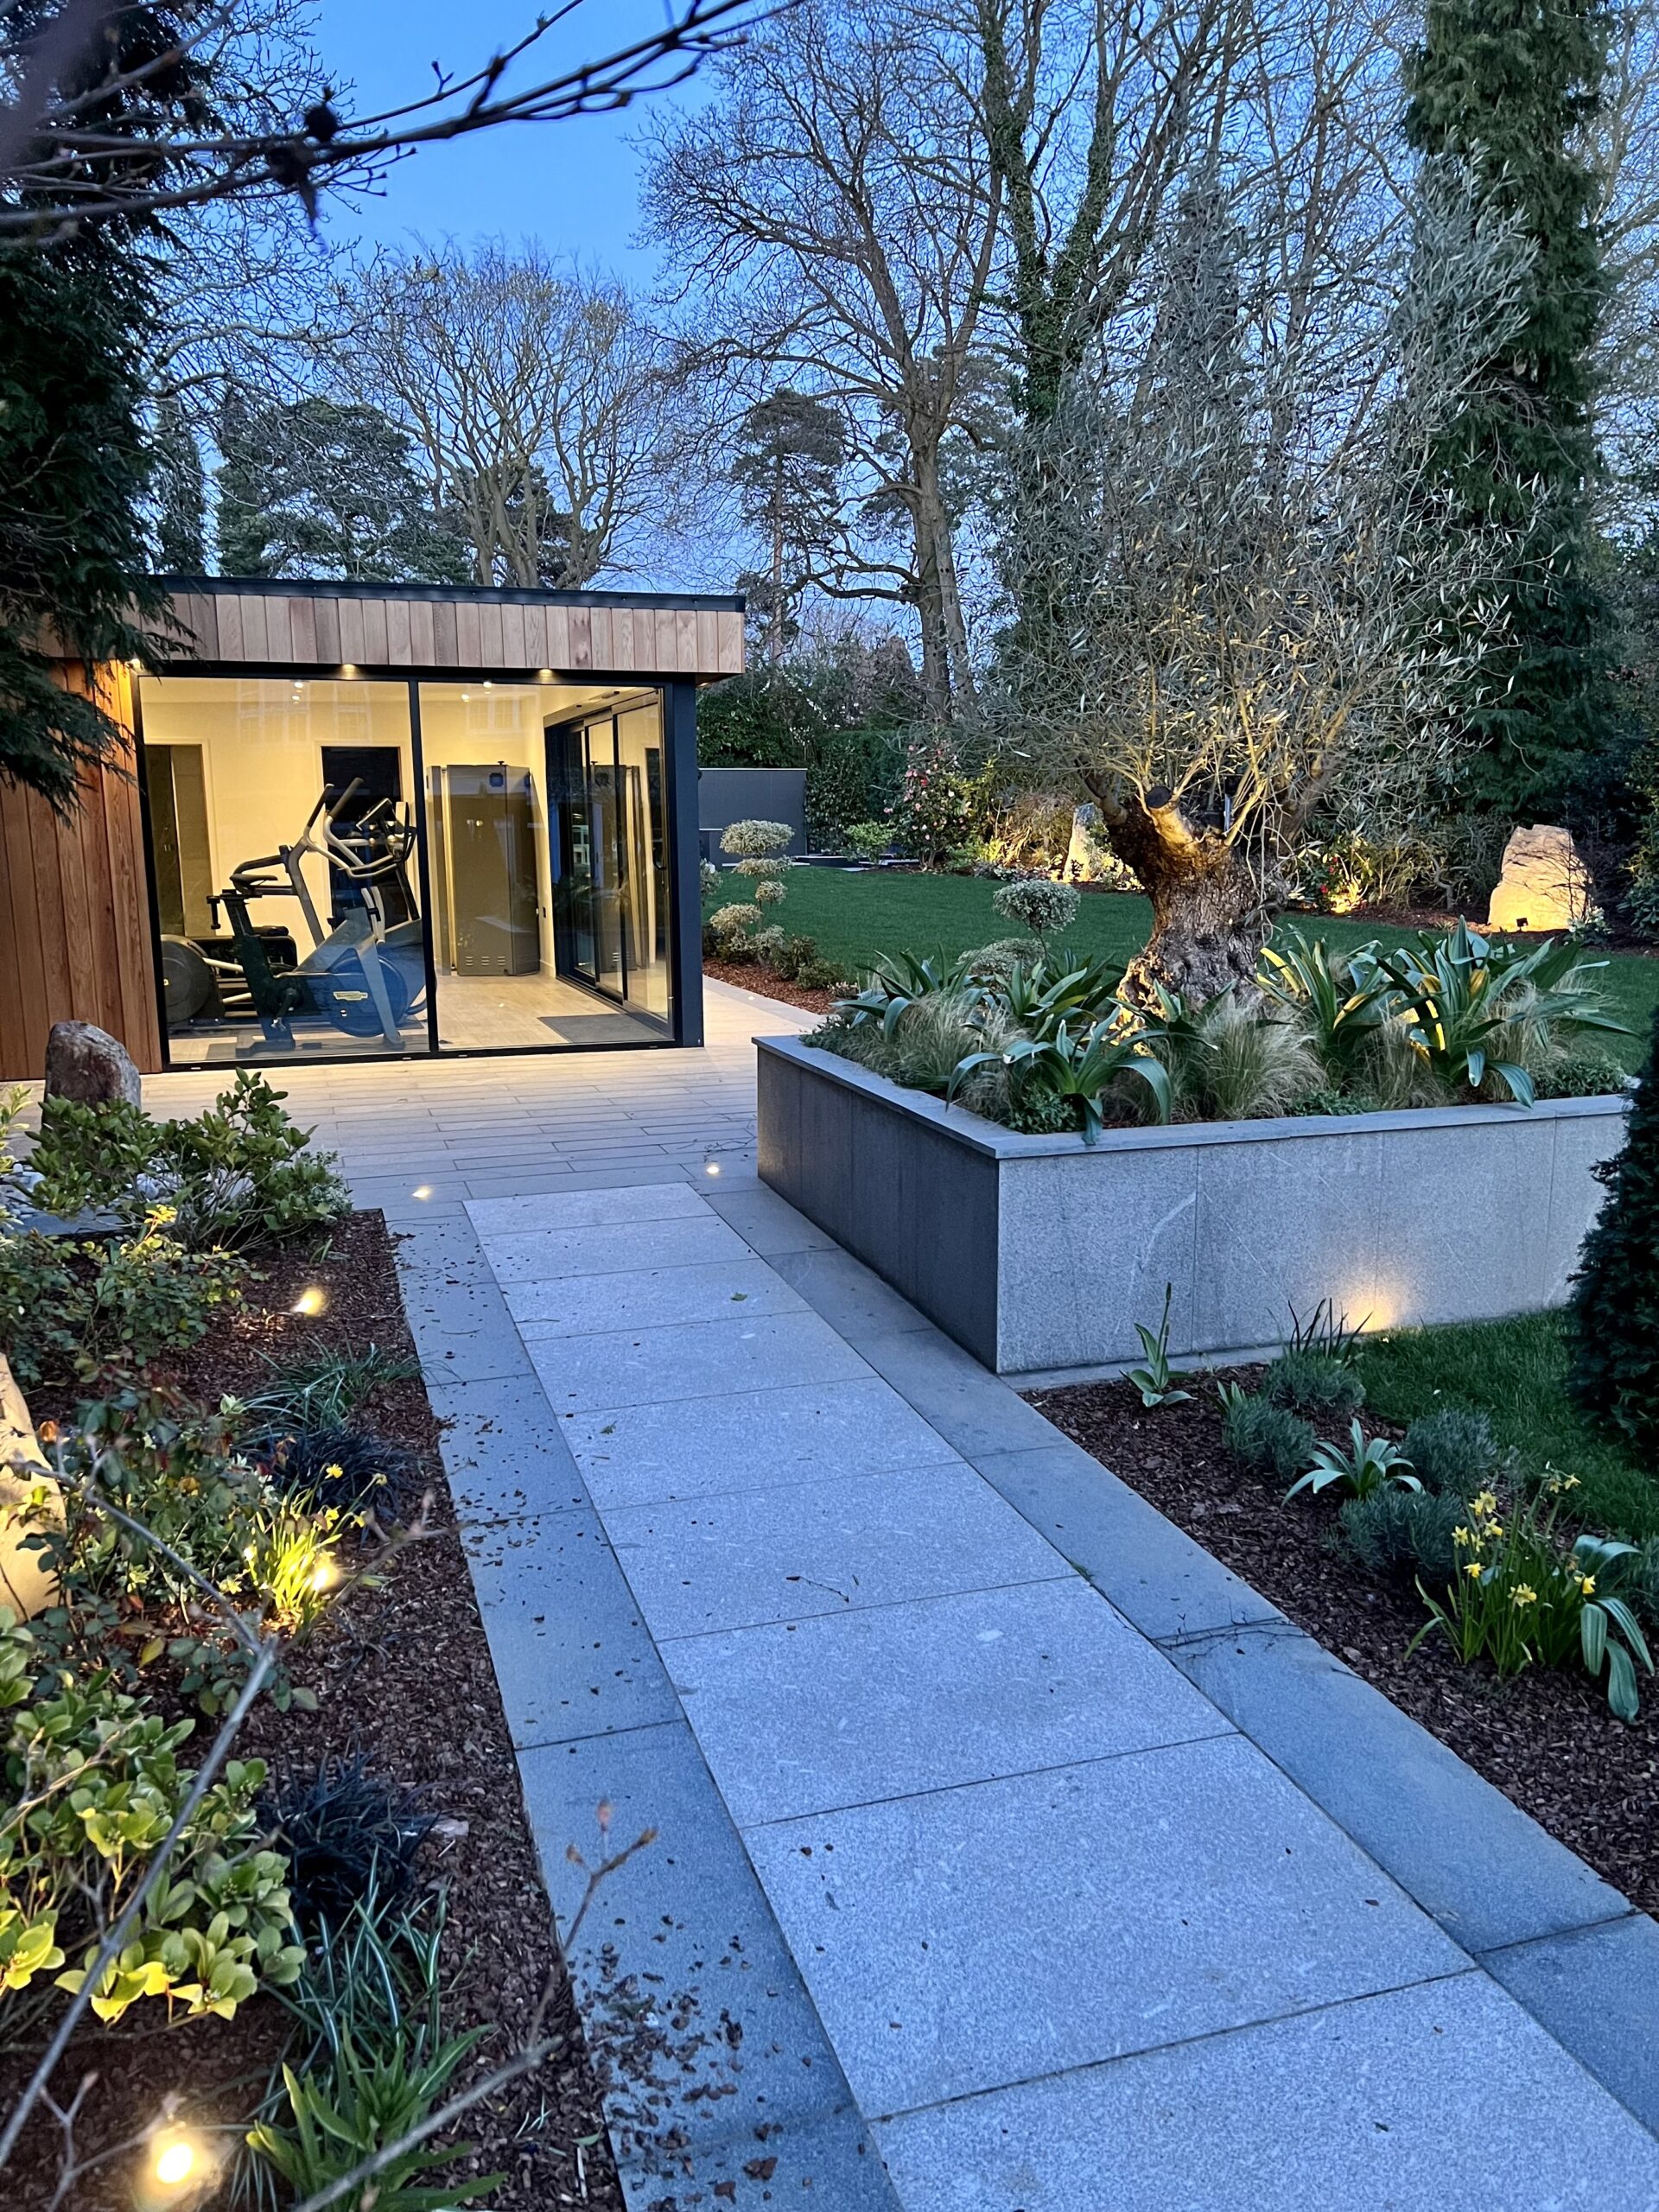 Evening exterior view of a Vivid Green garden gym featuring anthracite grey aluminium corner glass sliding doors, surrounded by garden foliage, with a concrete walkway leading to the entrance and trees in the background.